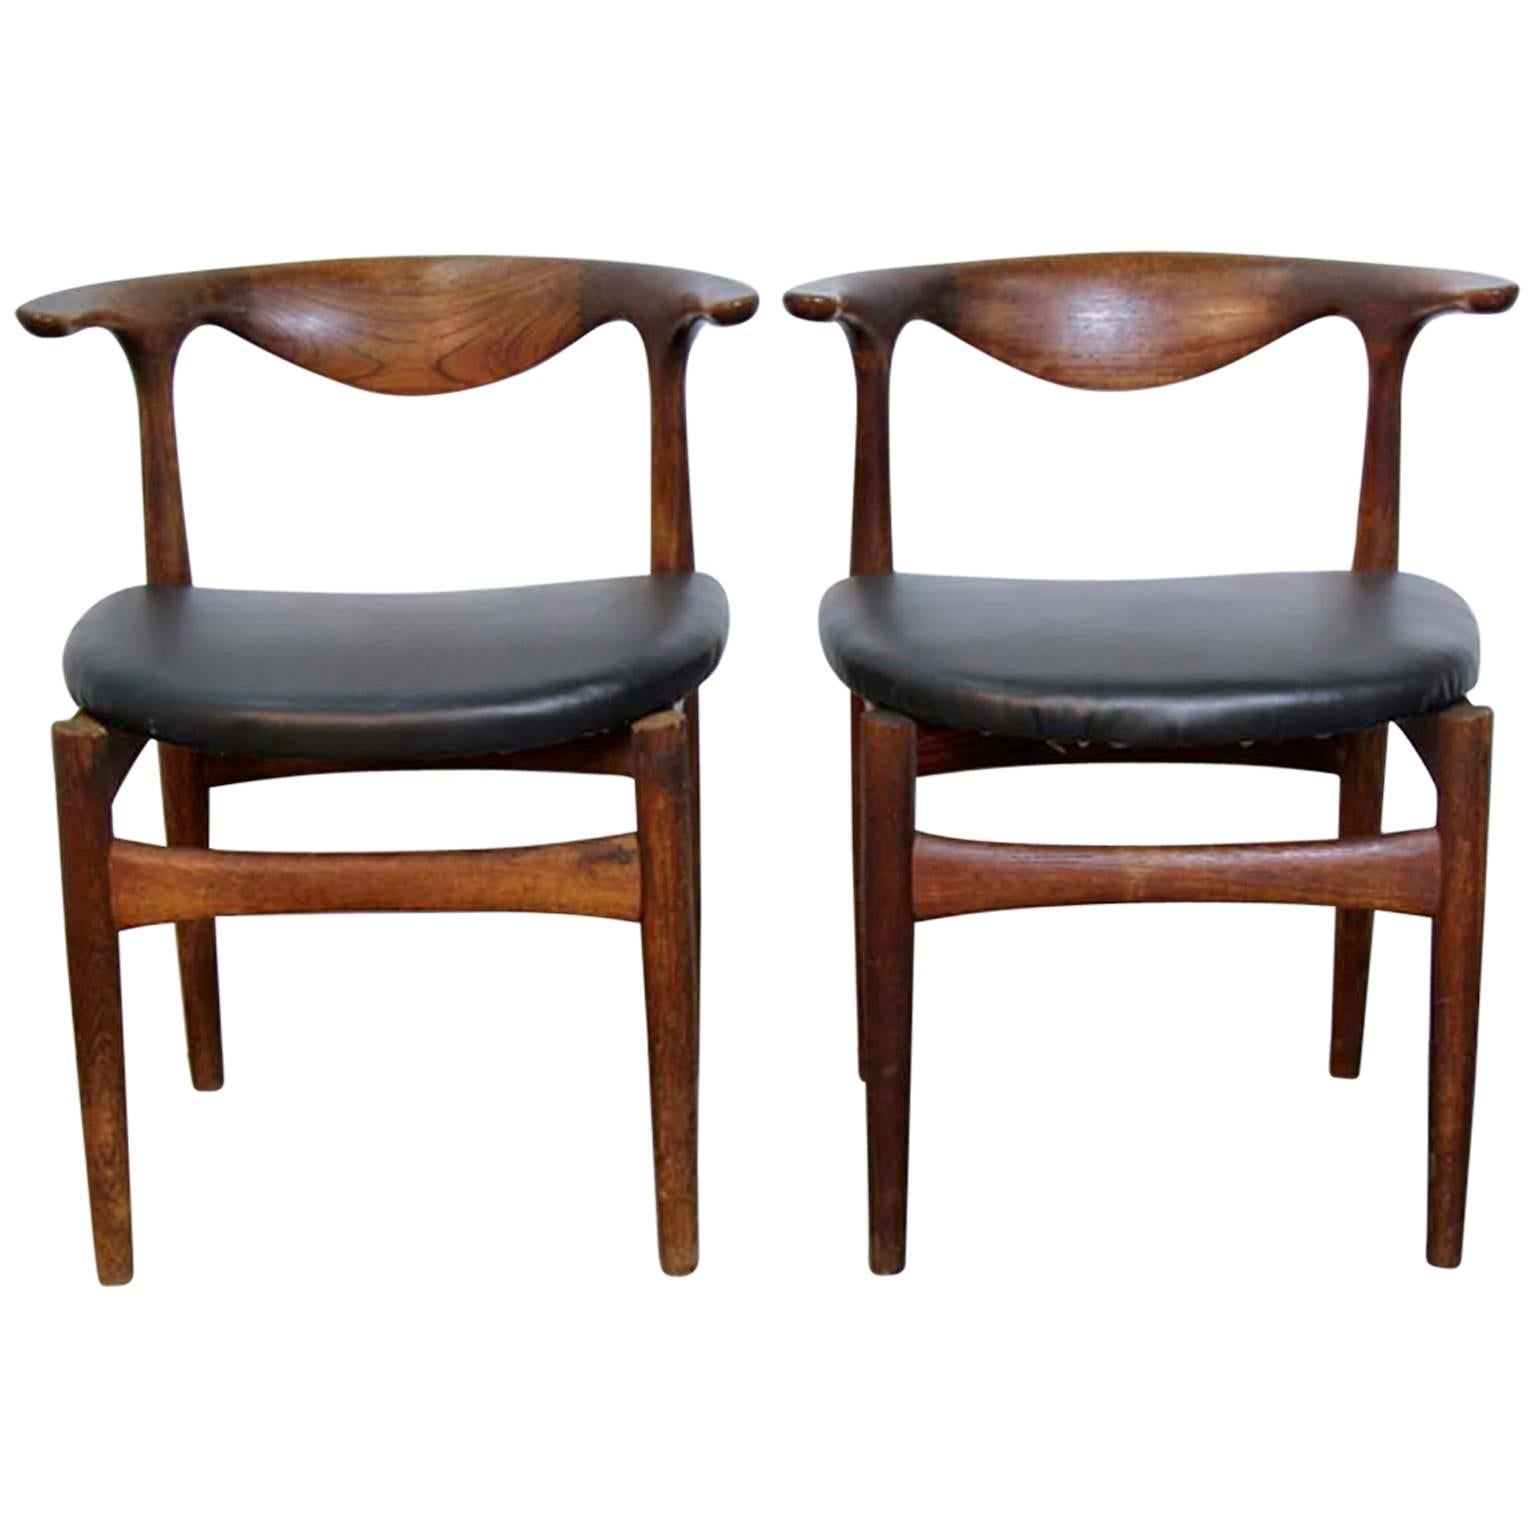 Pair of Danish Modern Teak and Leather Seat Chairs For Sale